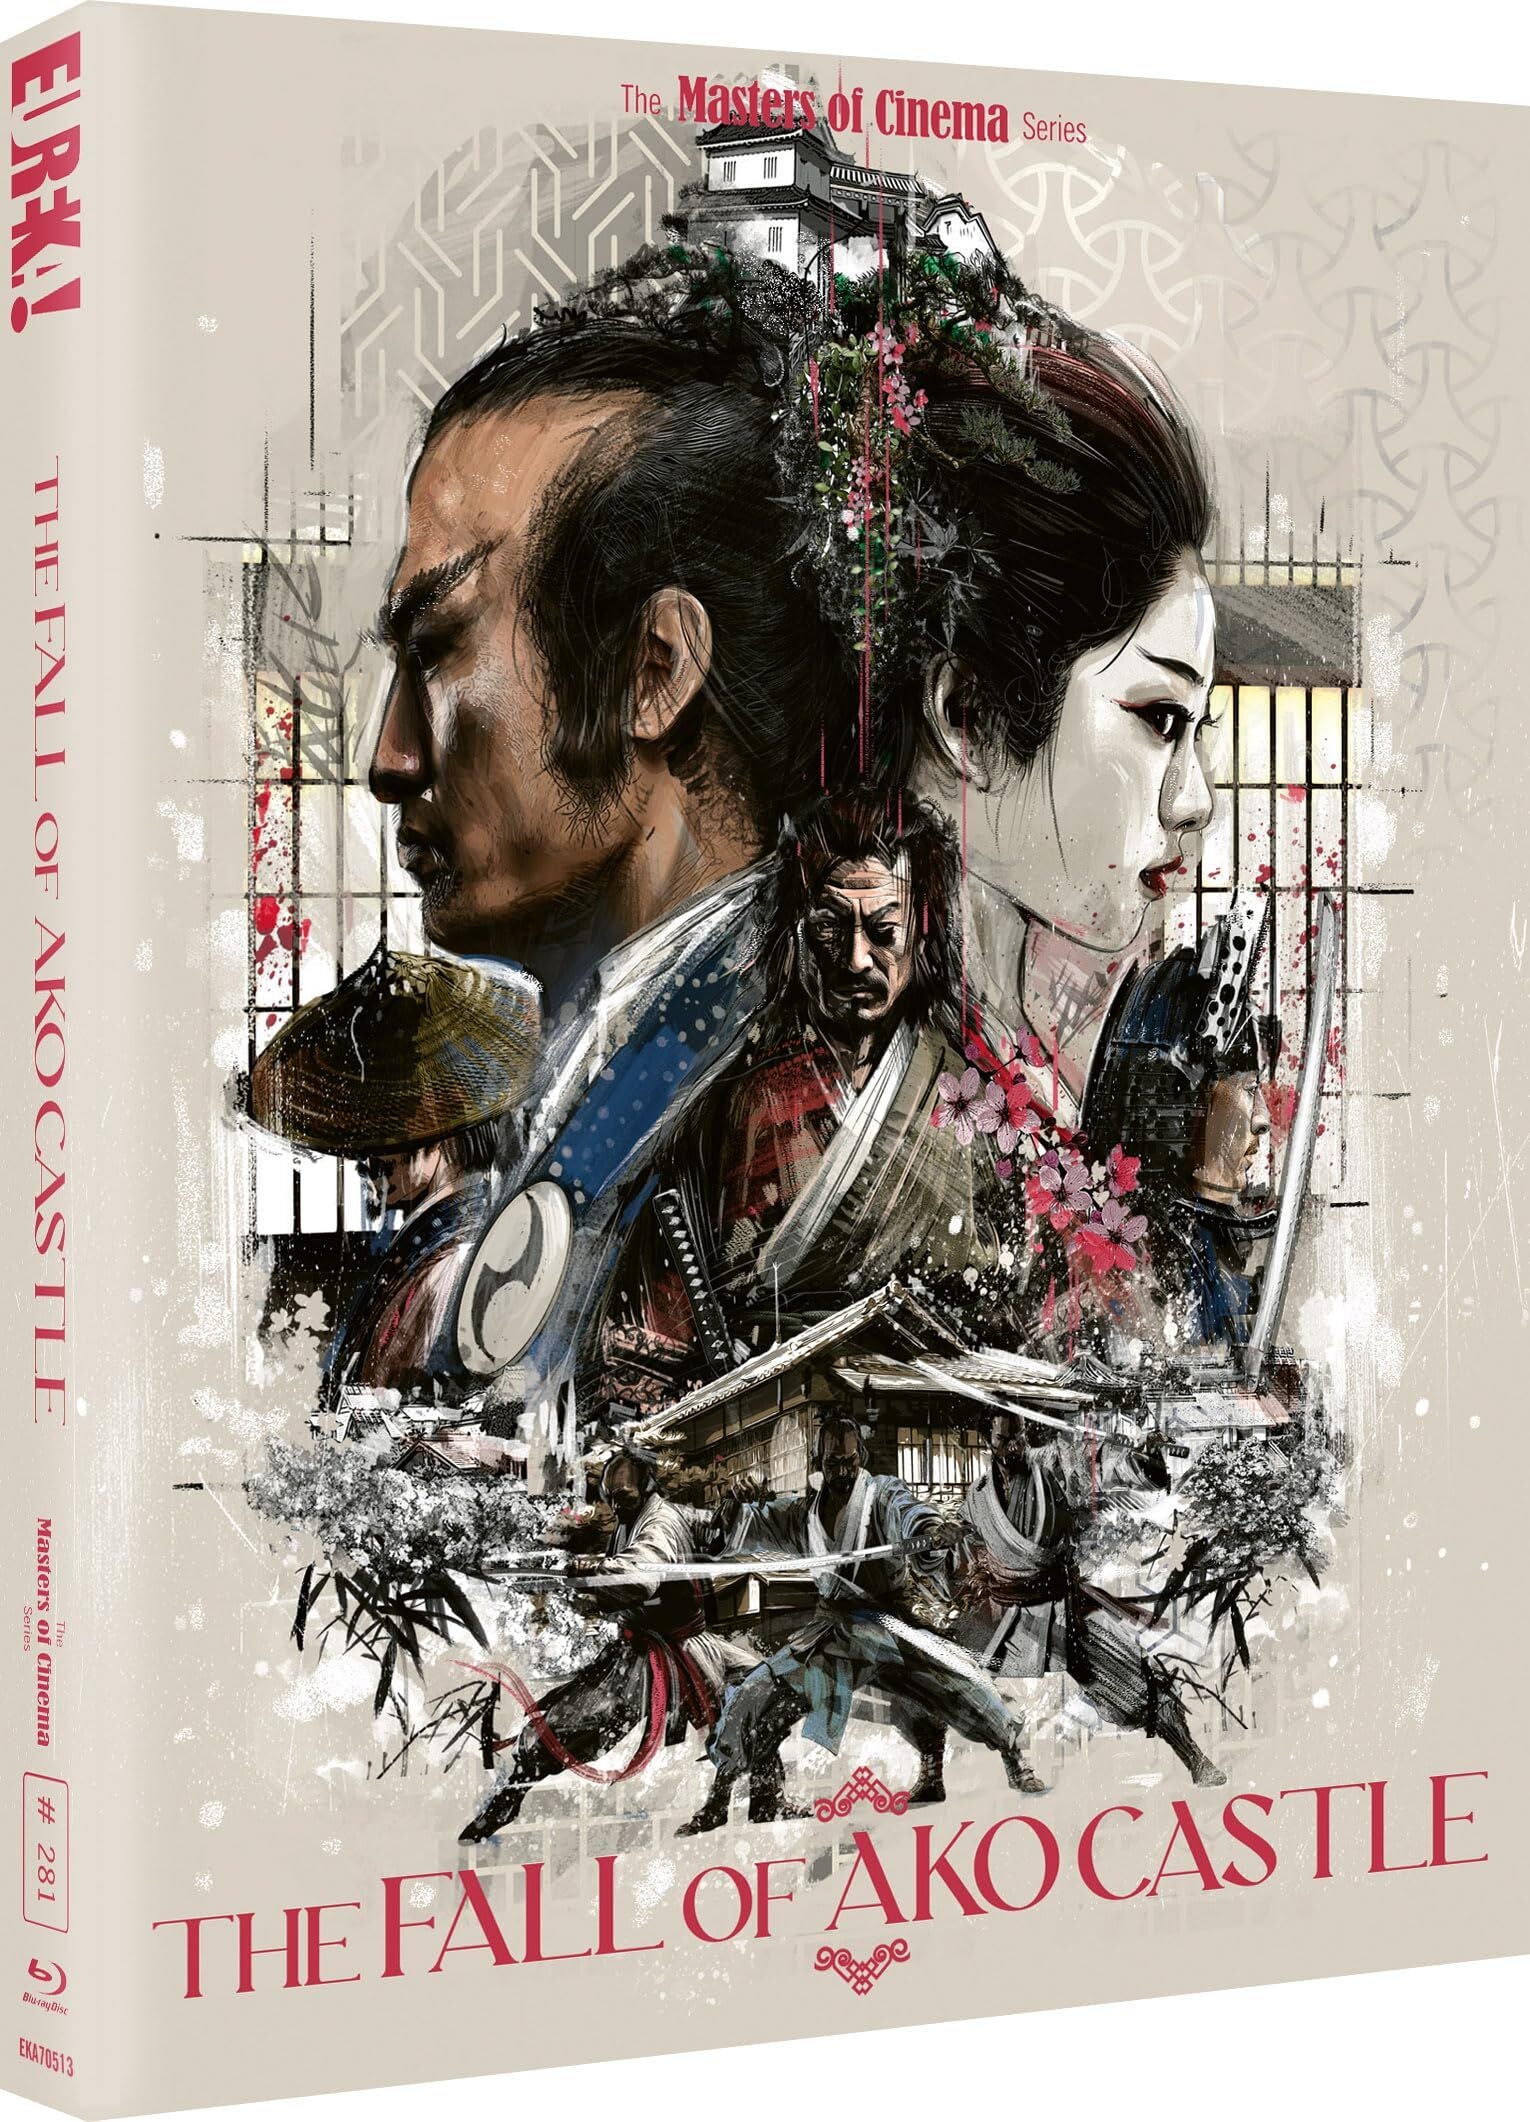 THE FALL OF AKO CASTLE (REGION B IMPORT - LIMITED EDITION) BLU-RAY